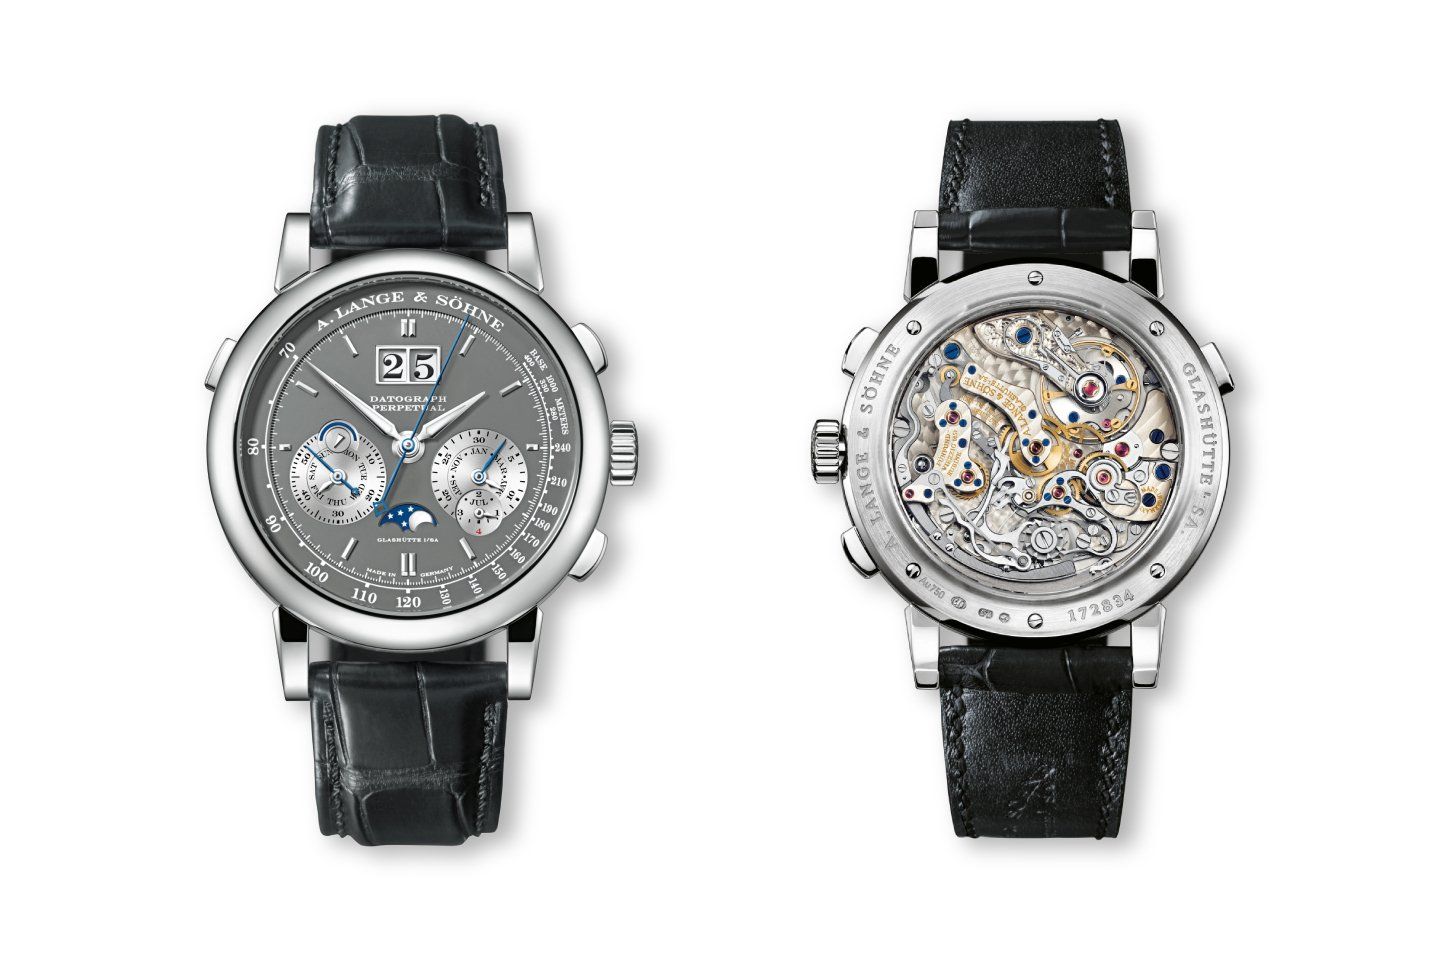 The Datograph Perpetual debuted in 2006 and received an aesthetic update in 2010